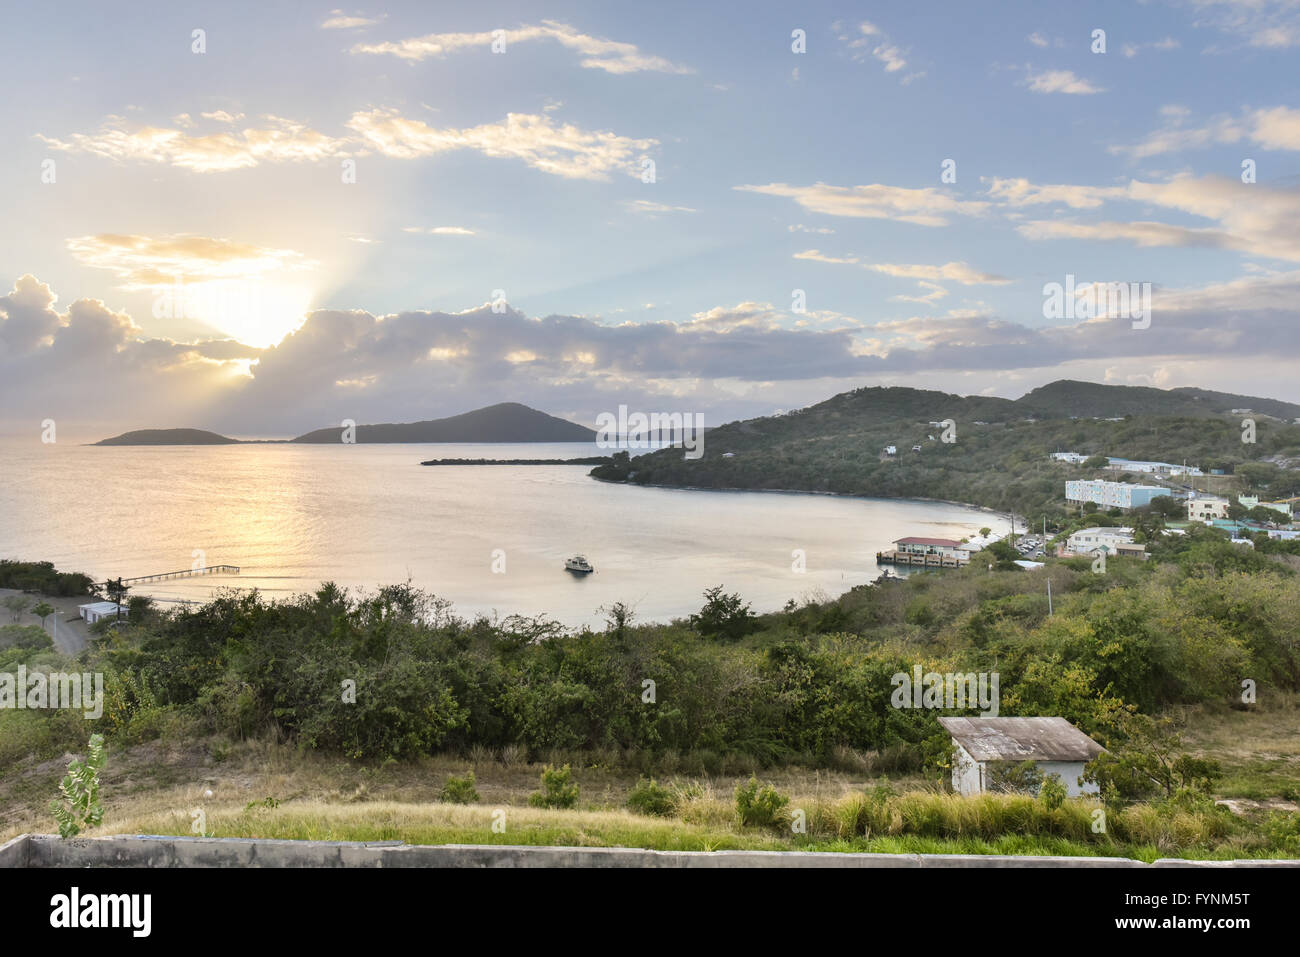 Panorama of the peaceful Caribbean harbor and town at sunset on Culebra, a small island in Puerto Rico Stock Photo